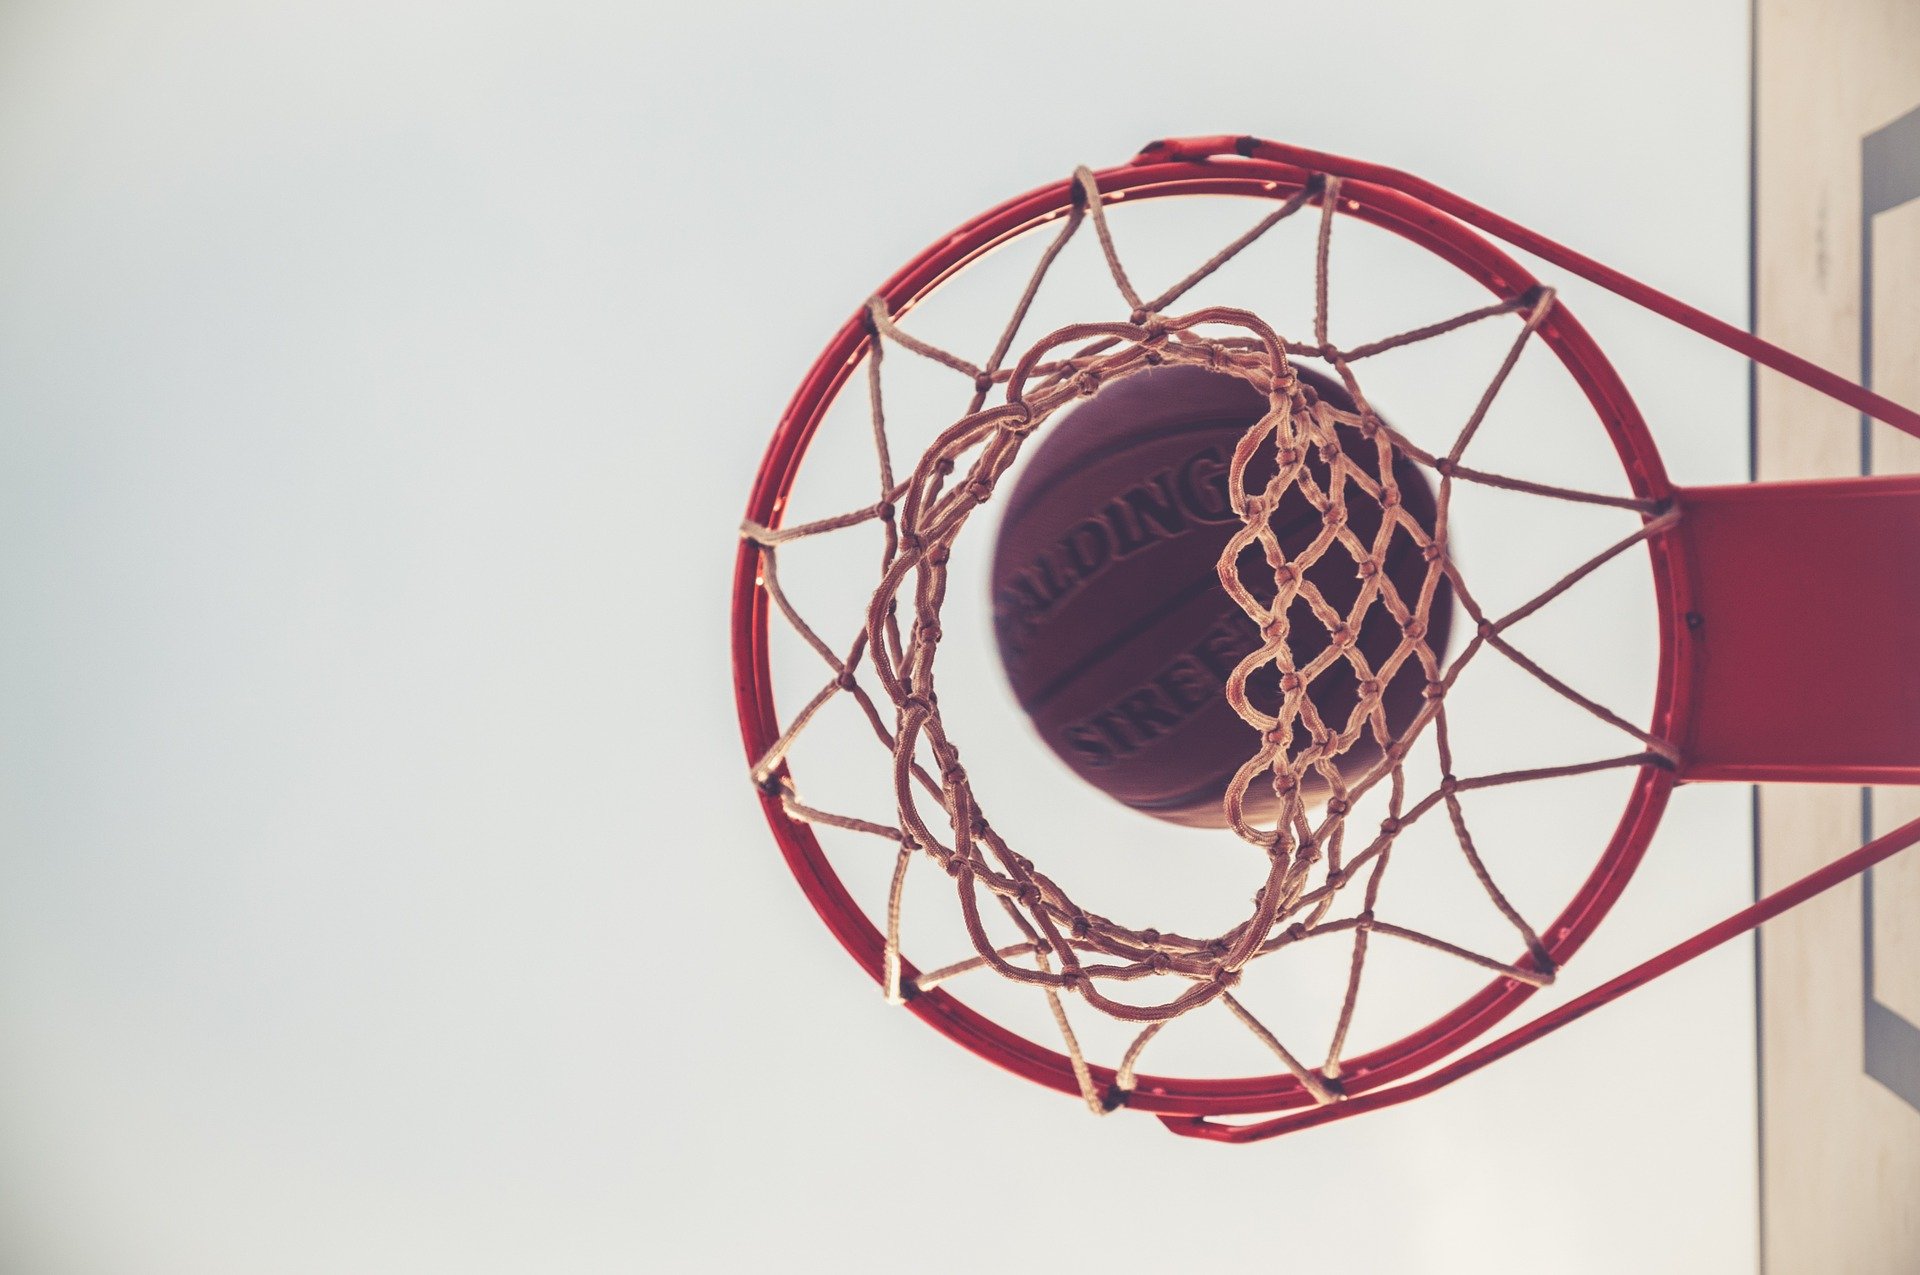 Pictured - A basketball ball and a hoop | Source: Pixabay